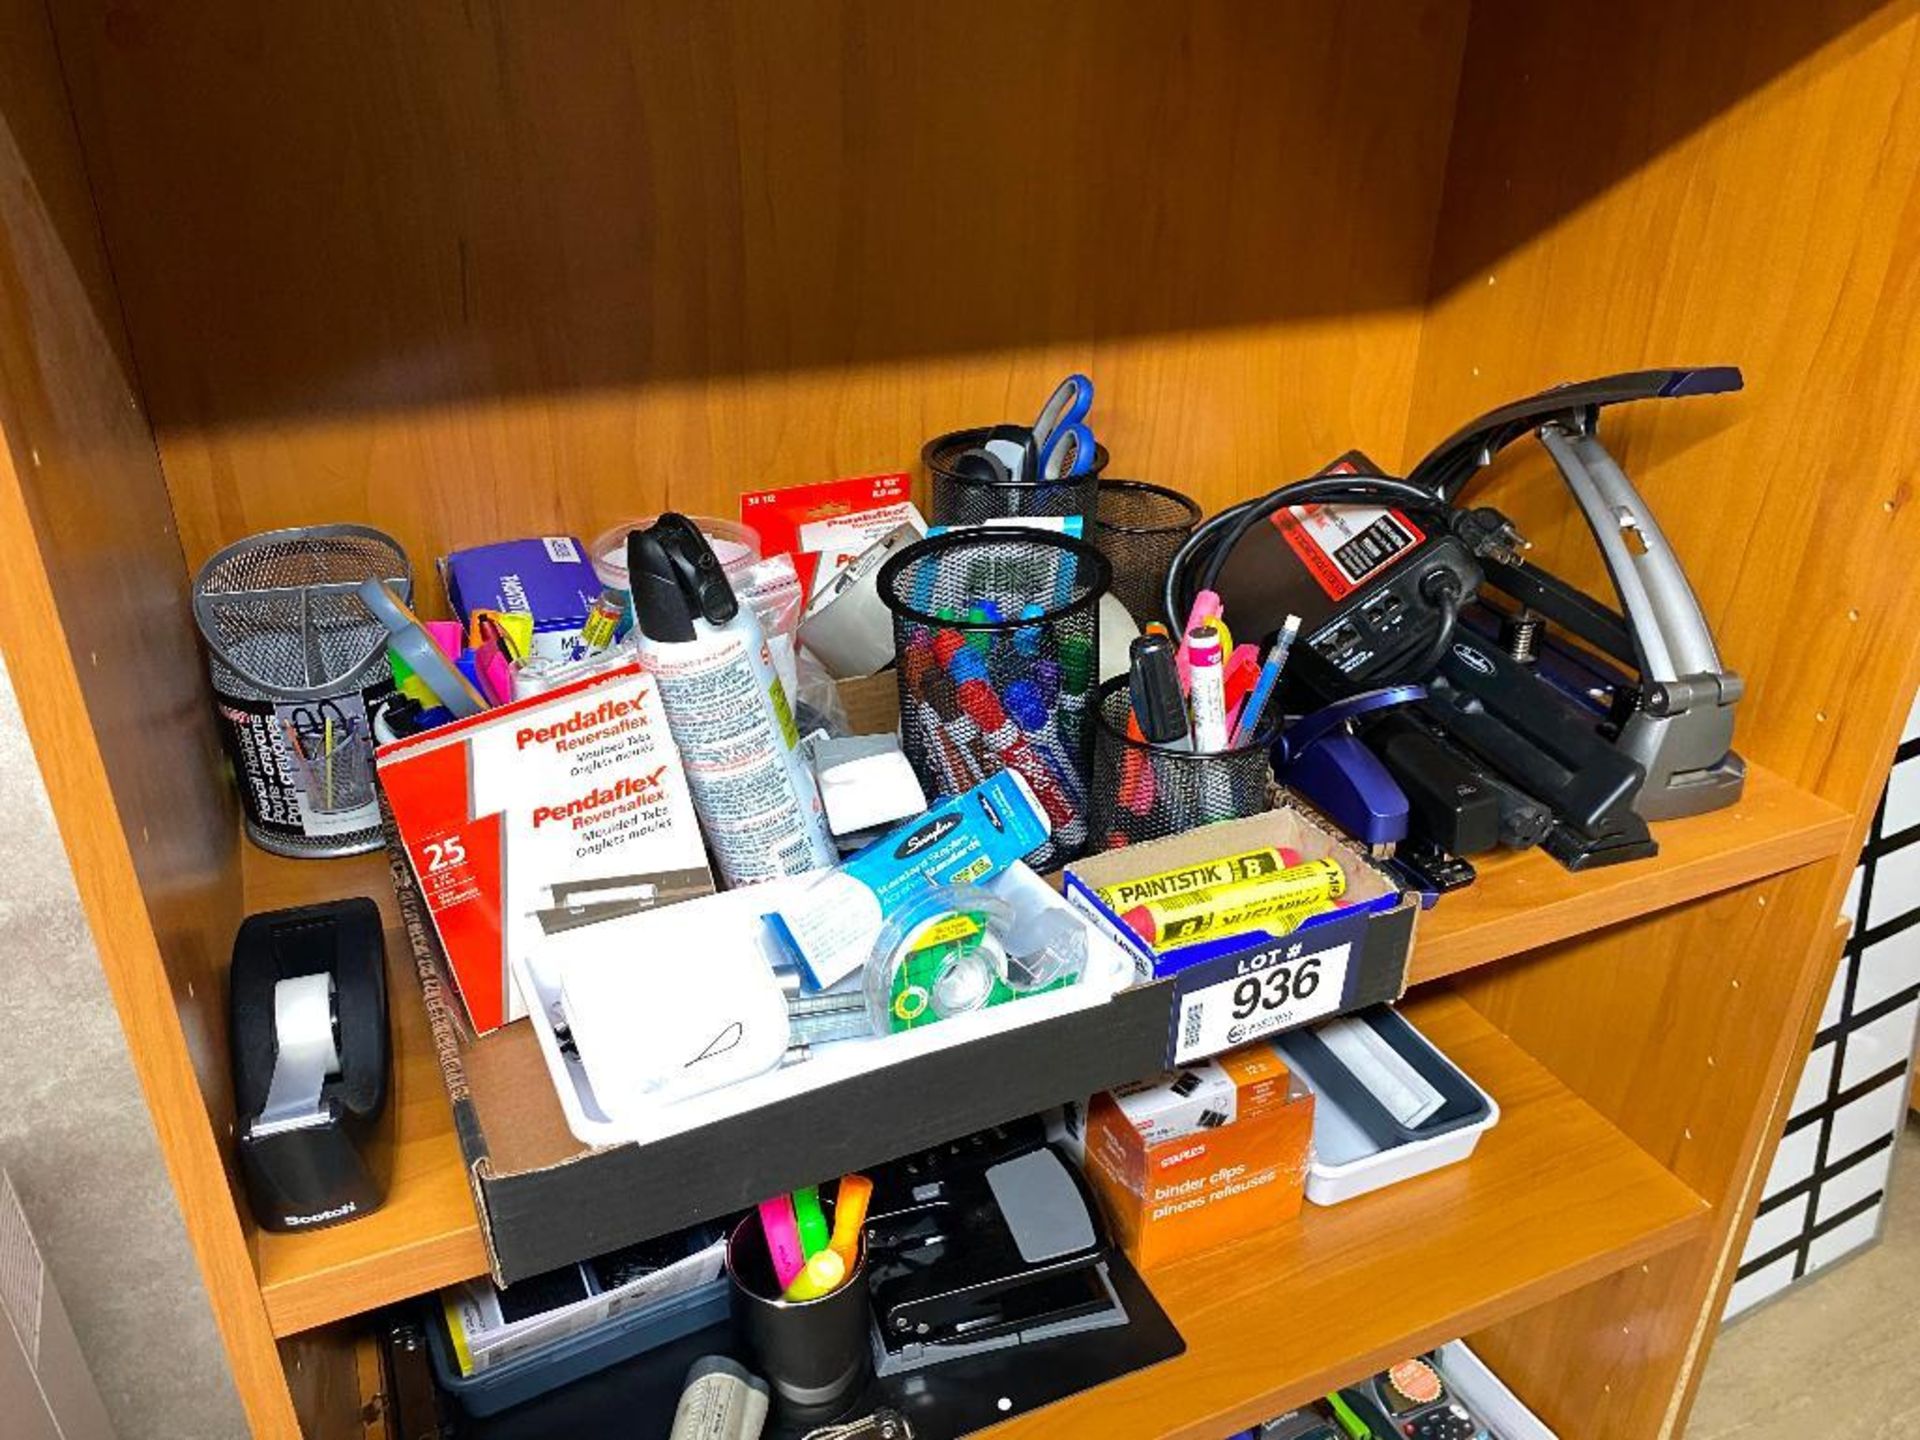 Lot of Asst. Office Supplies including Power Bar, Hole Punches, Staplers, Label Printer, etc. - Image 8 of 9